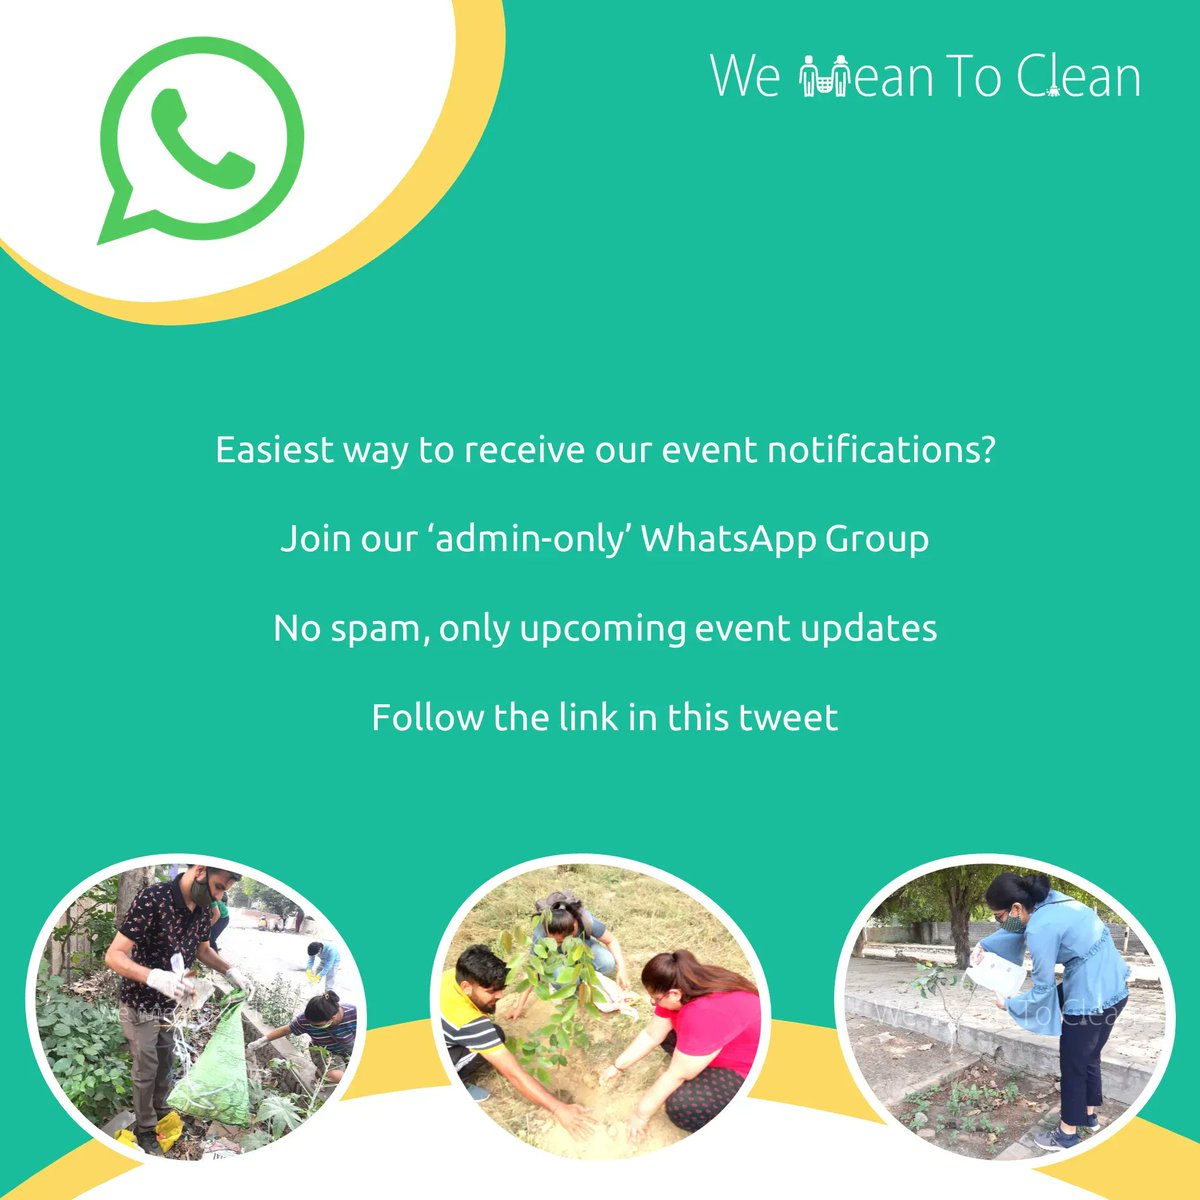 Our event updates directly in your #WhatsApp Admin-only group No spam! Join: chat.whatsapp.com/KUeDYjb41oD8dI… #WeMeanToClean #CleanDelhi #SwachhBharat #MyCleanIndia #UNSDG #Shramdaan #Volunteering #SwachhataHiSeva #Plantation #Cleanup #CleanupDrive #ClimateActionNow